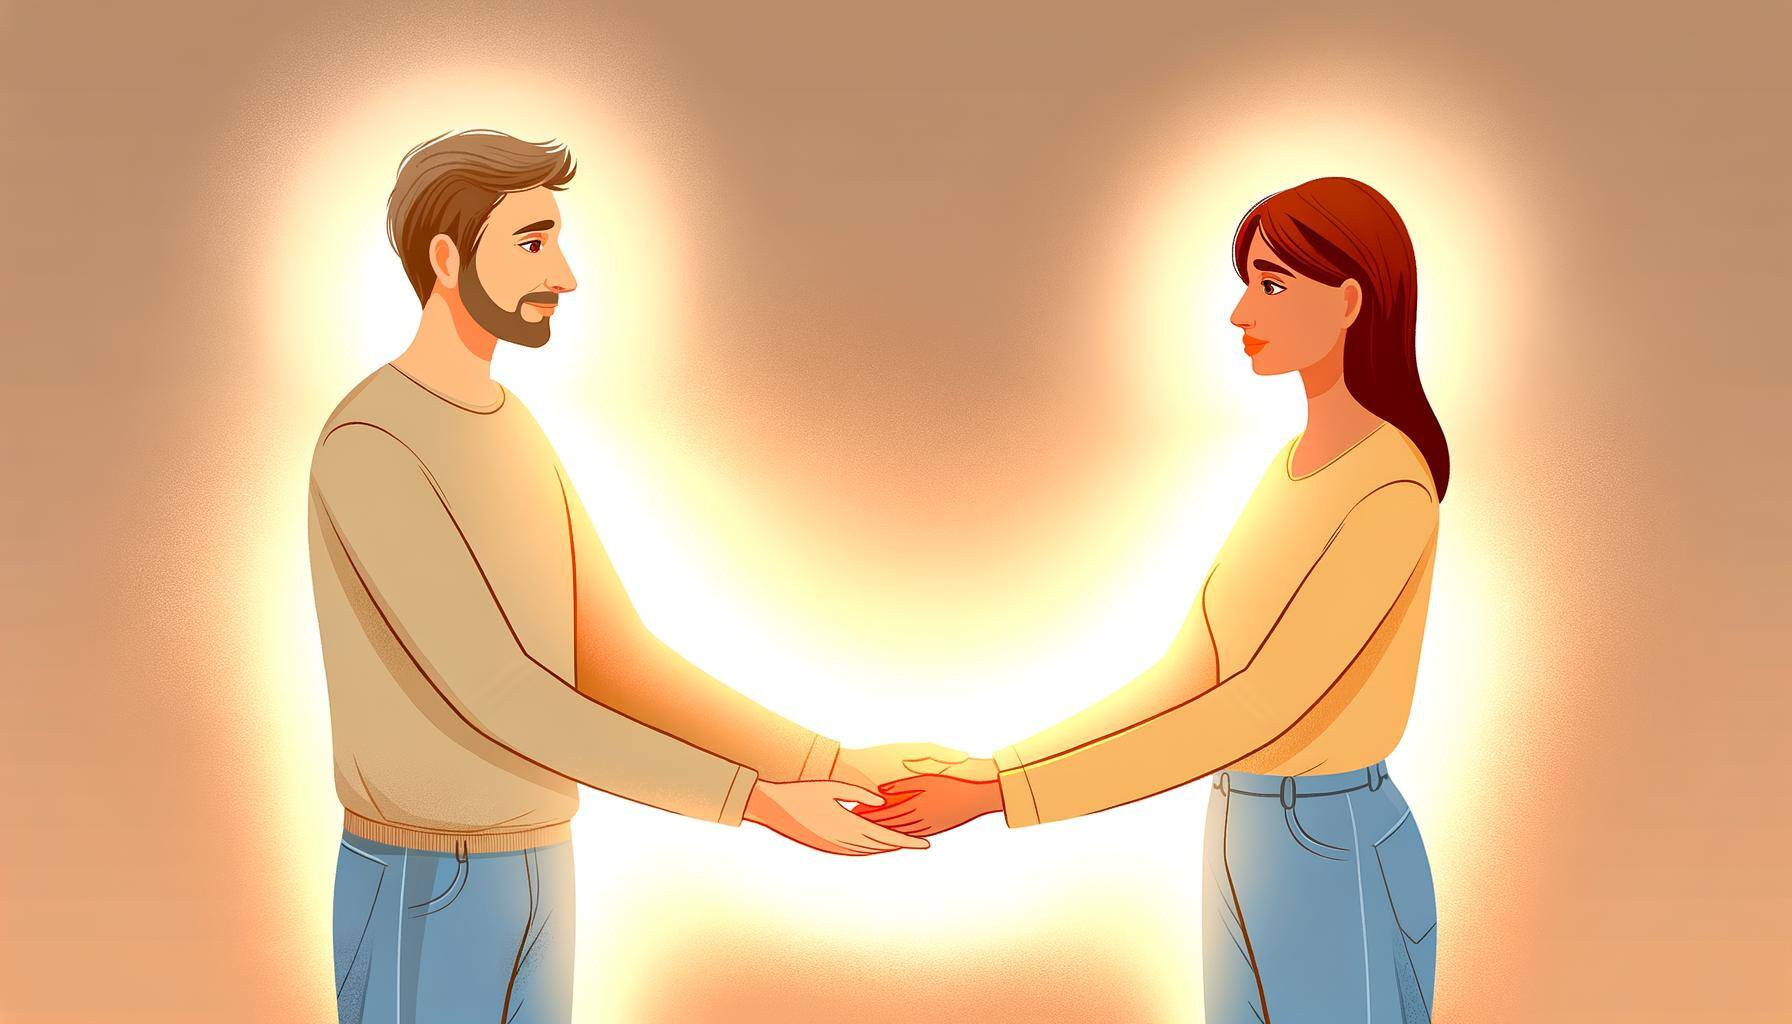 An image of two people holding hands, surrounded by a warm, glowing light as they express forgiveness and love towards each other